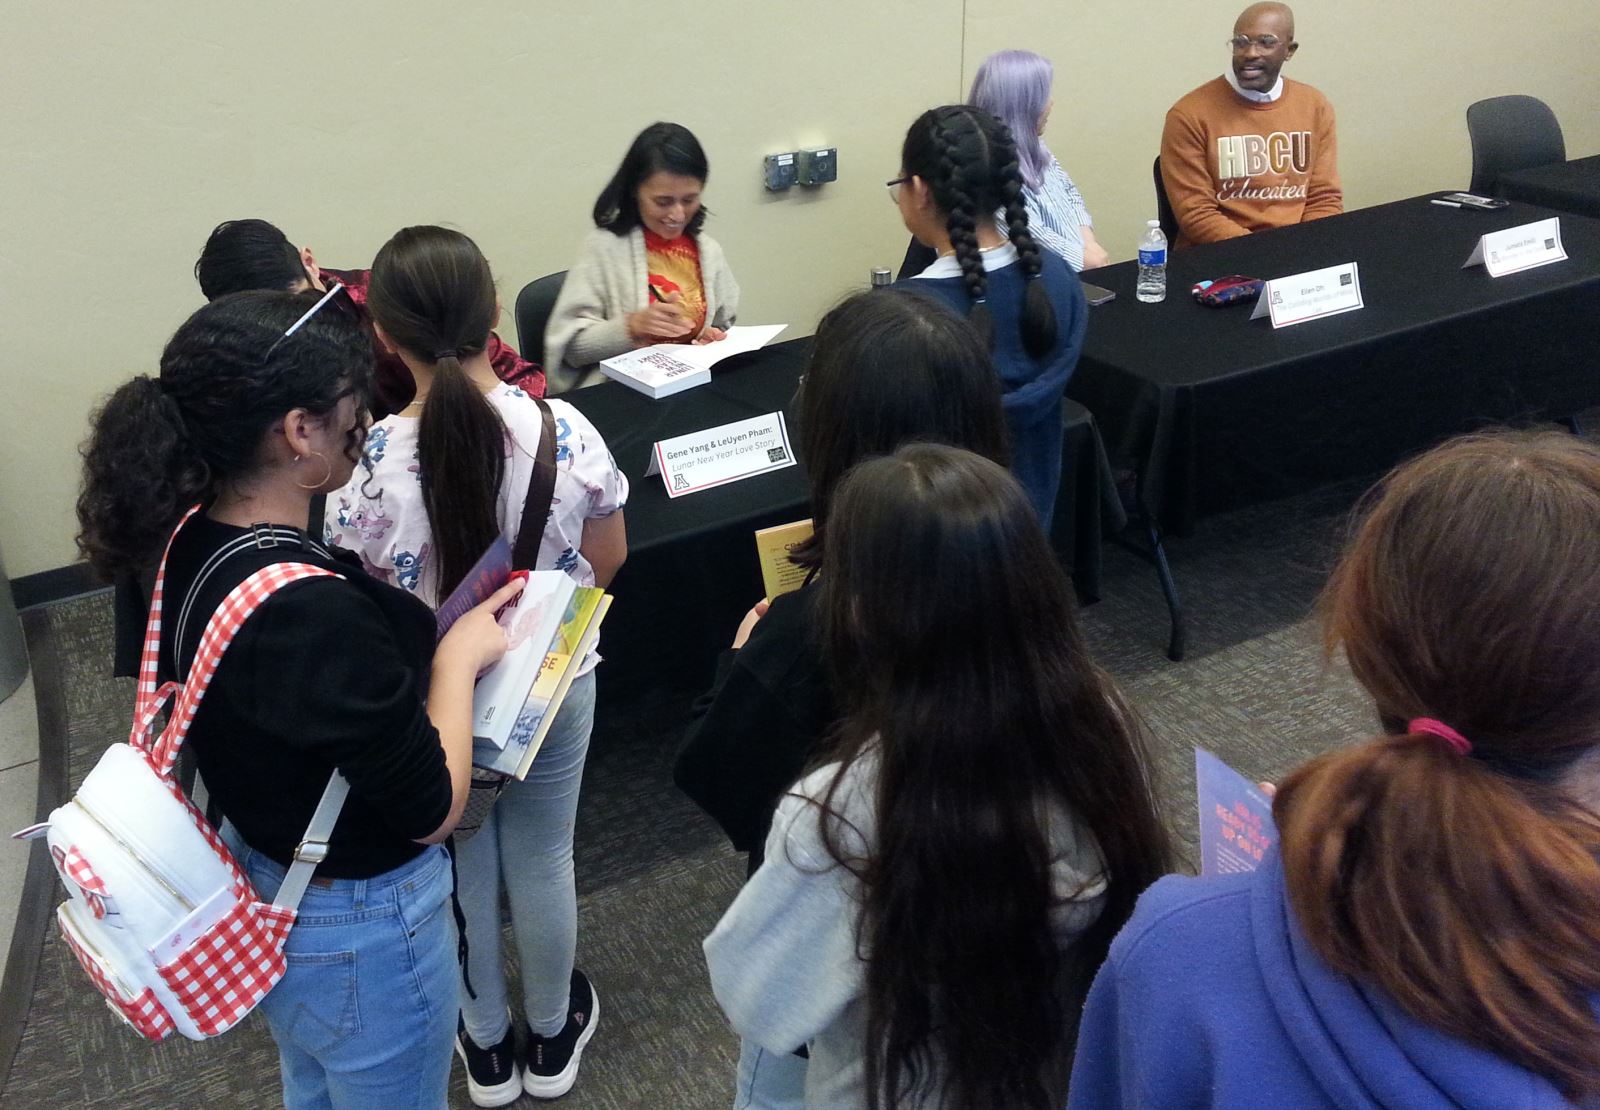 Students line up to have their books signed at the Festival of Books